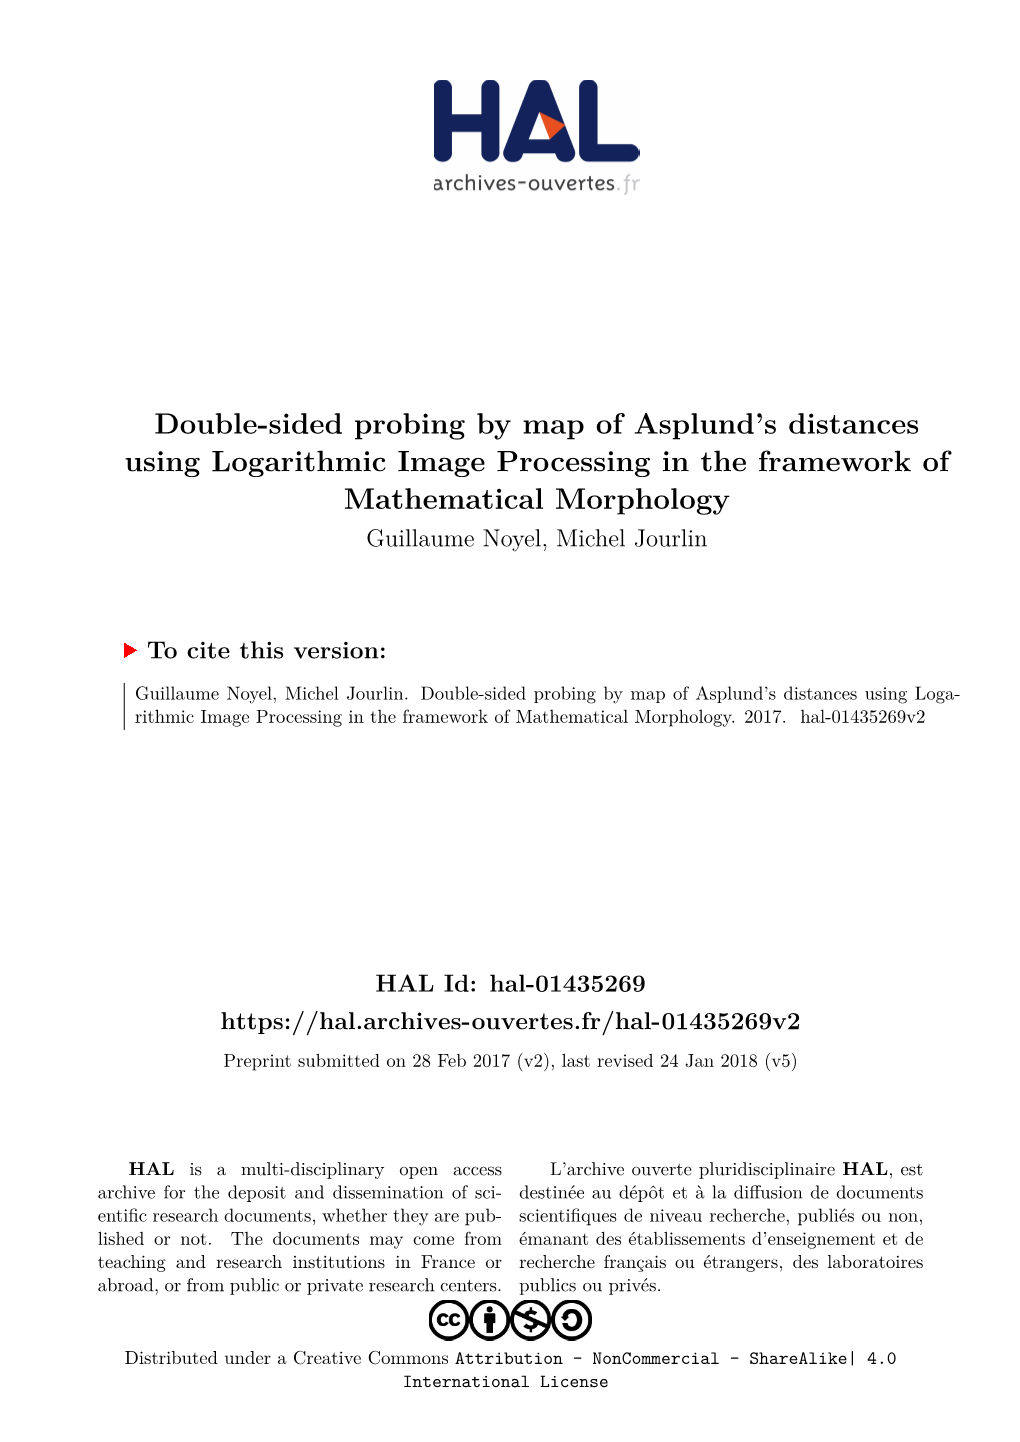 Double-Sided Probing by Map of Asplund's Distances Using